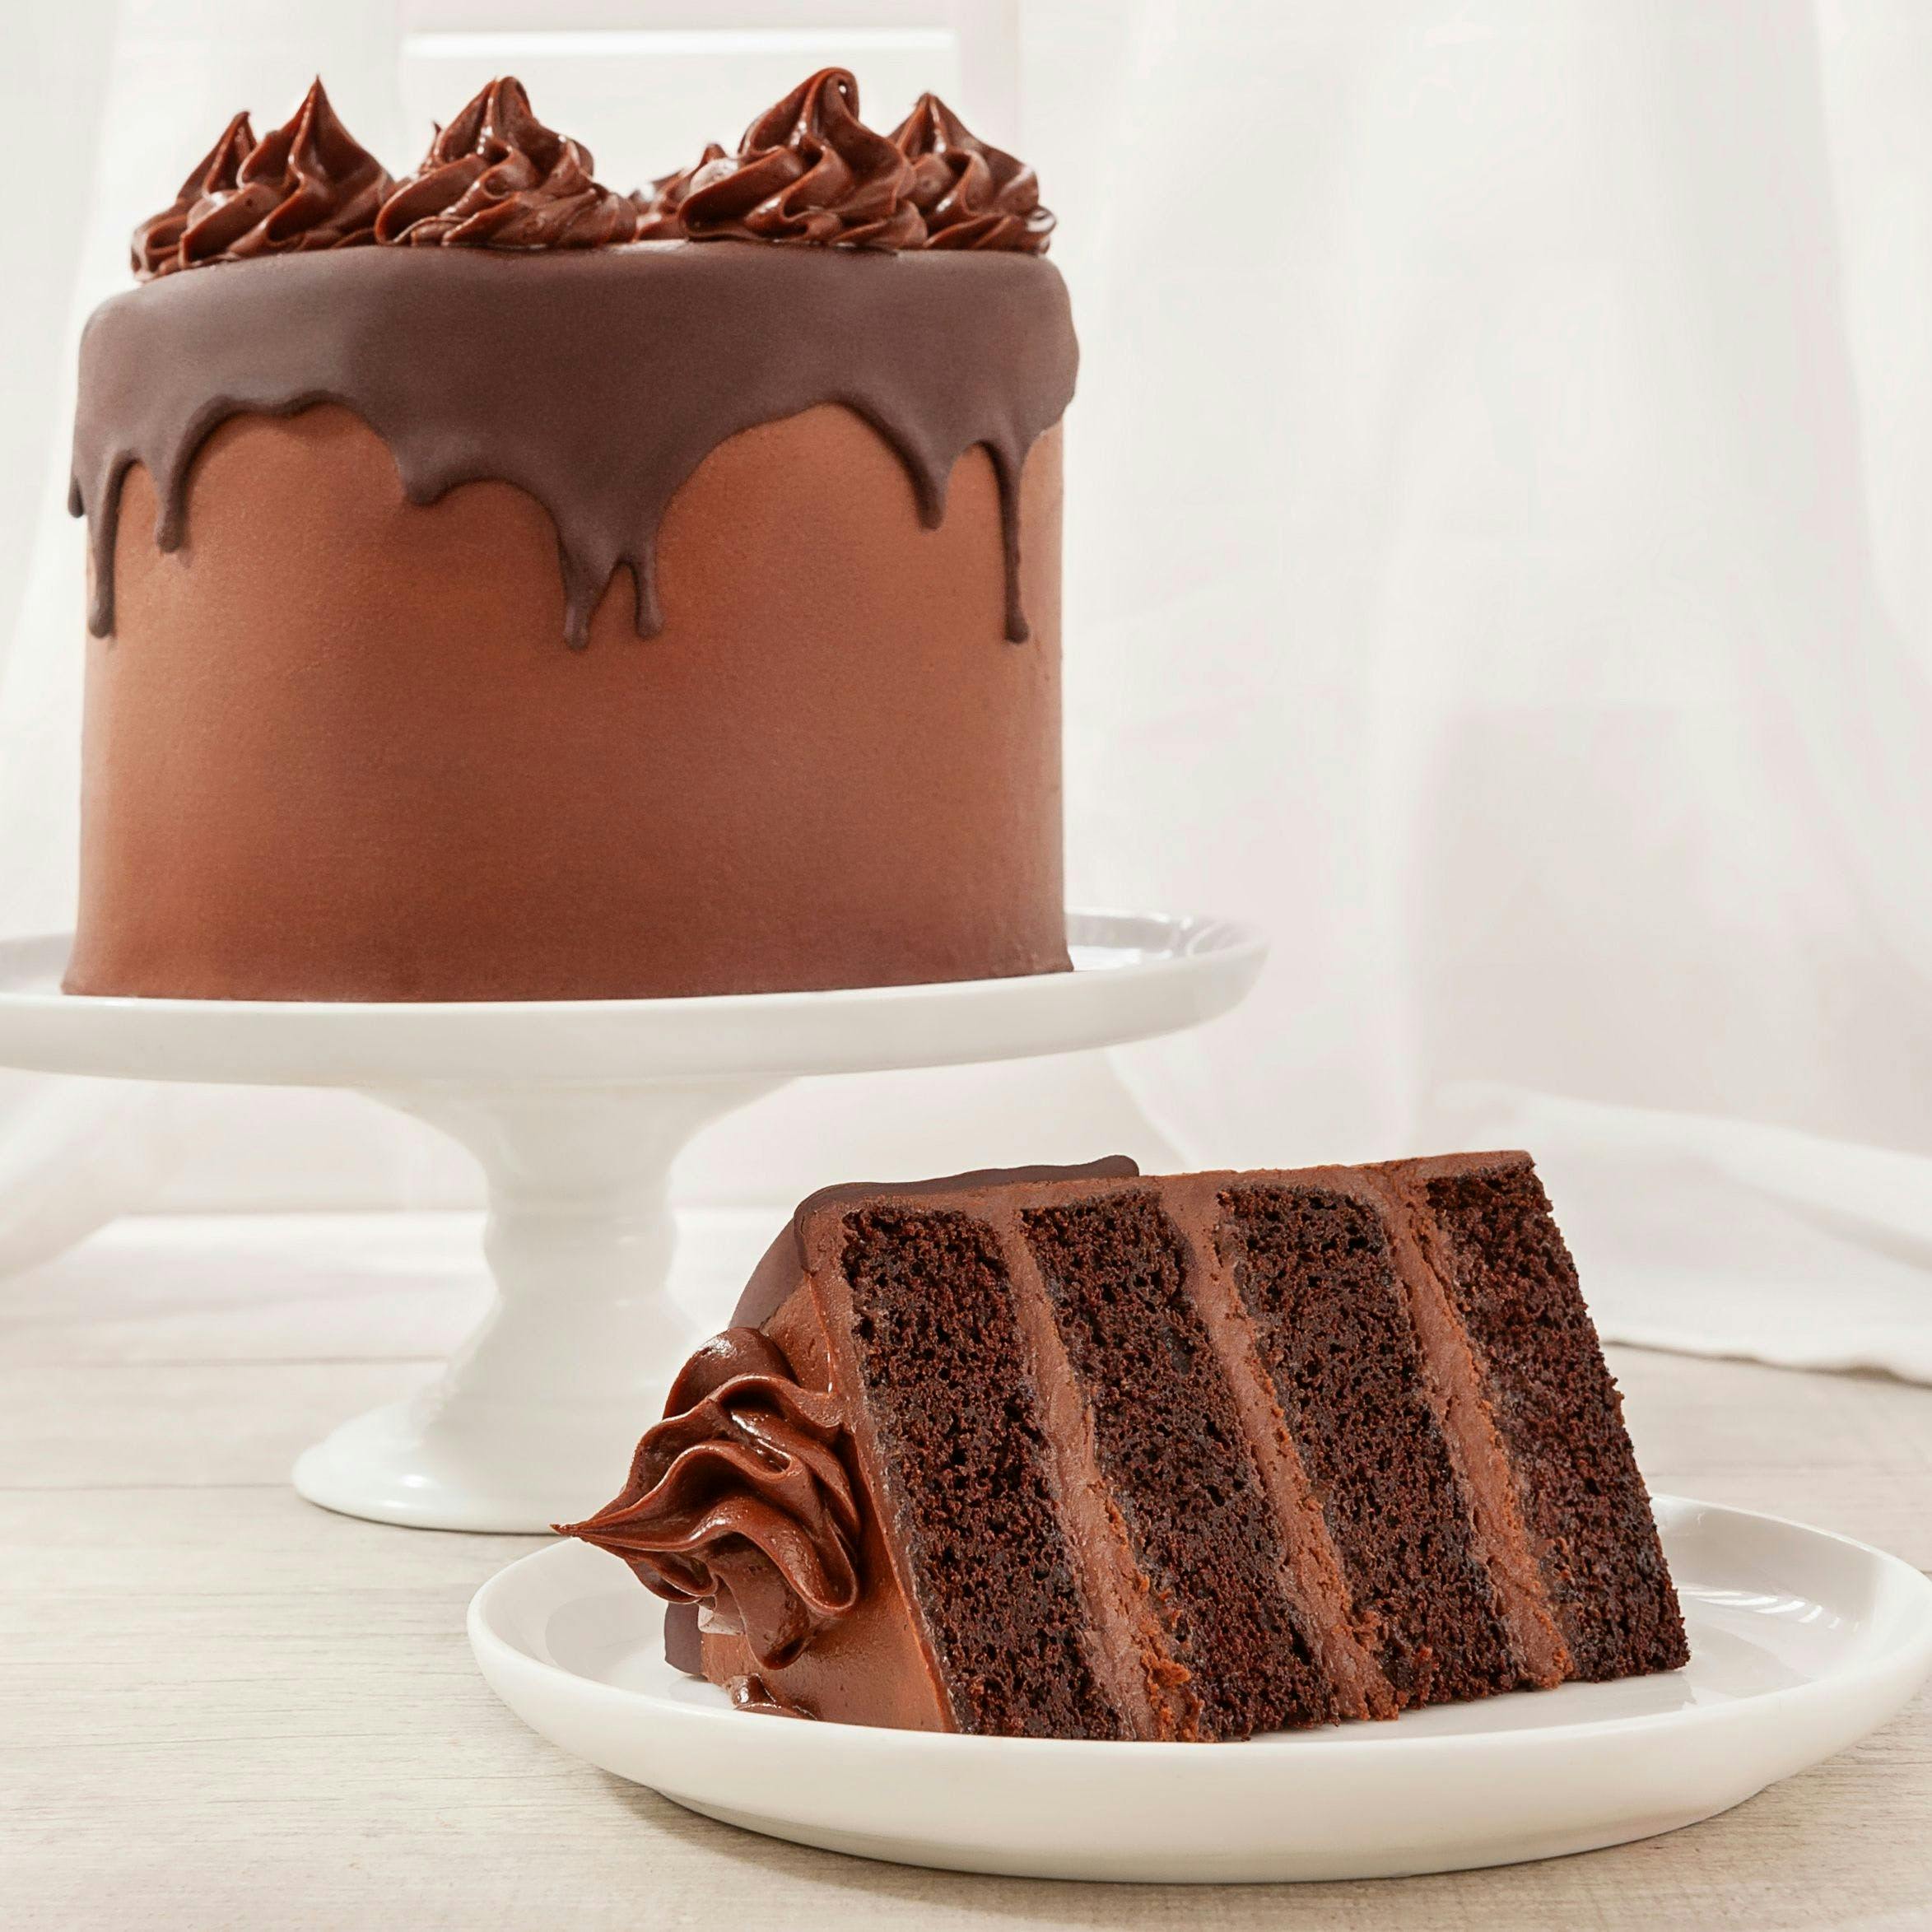 Share more than 76 chocolate and cake delivery best - awesomeenglish.edu.vn